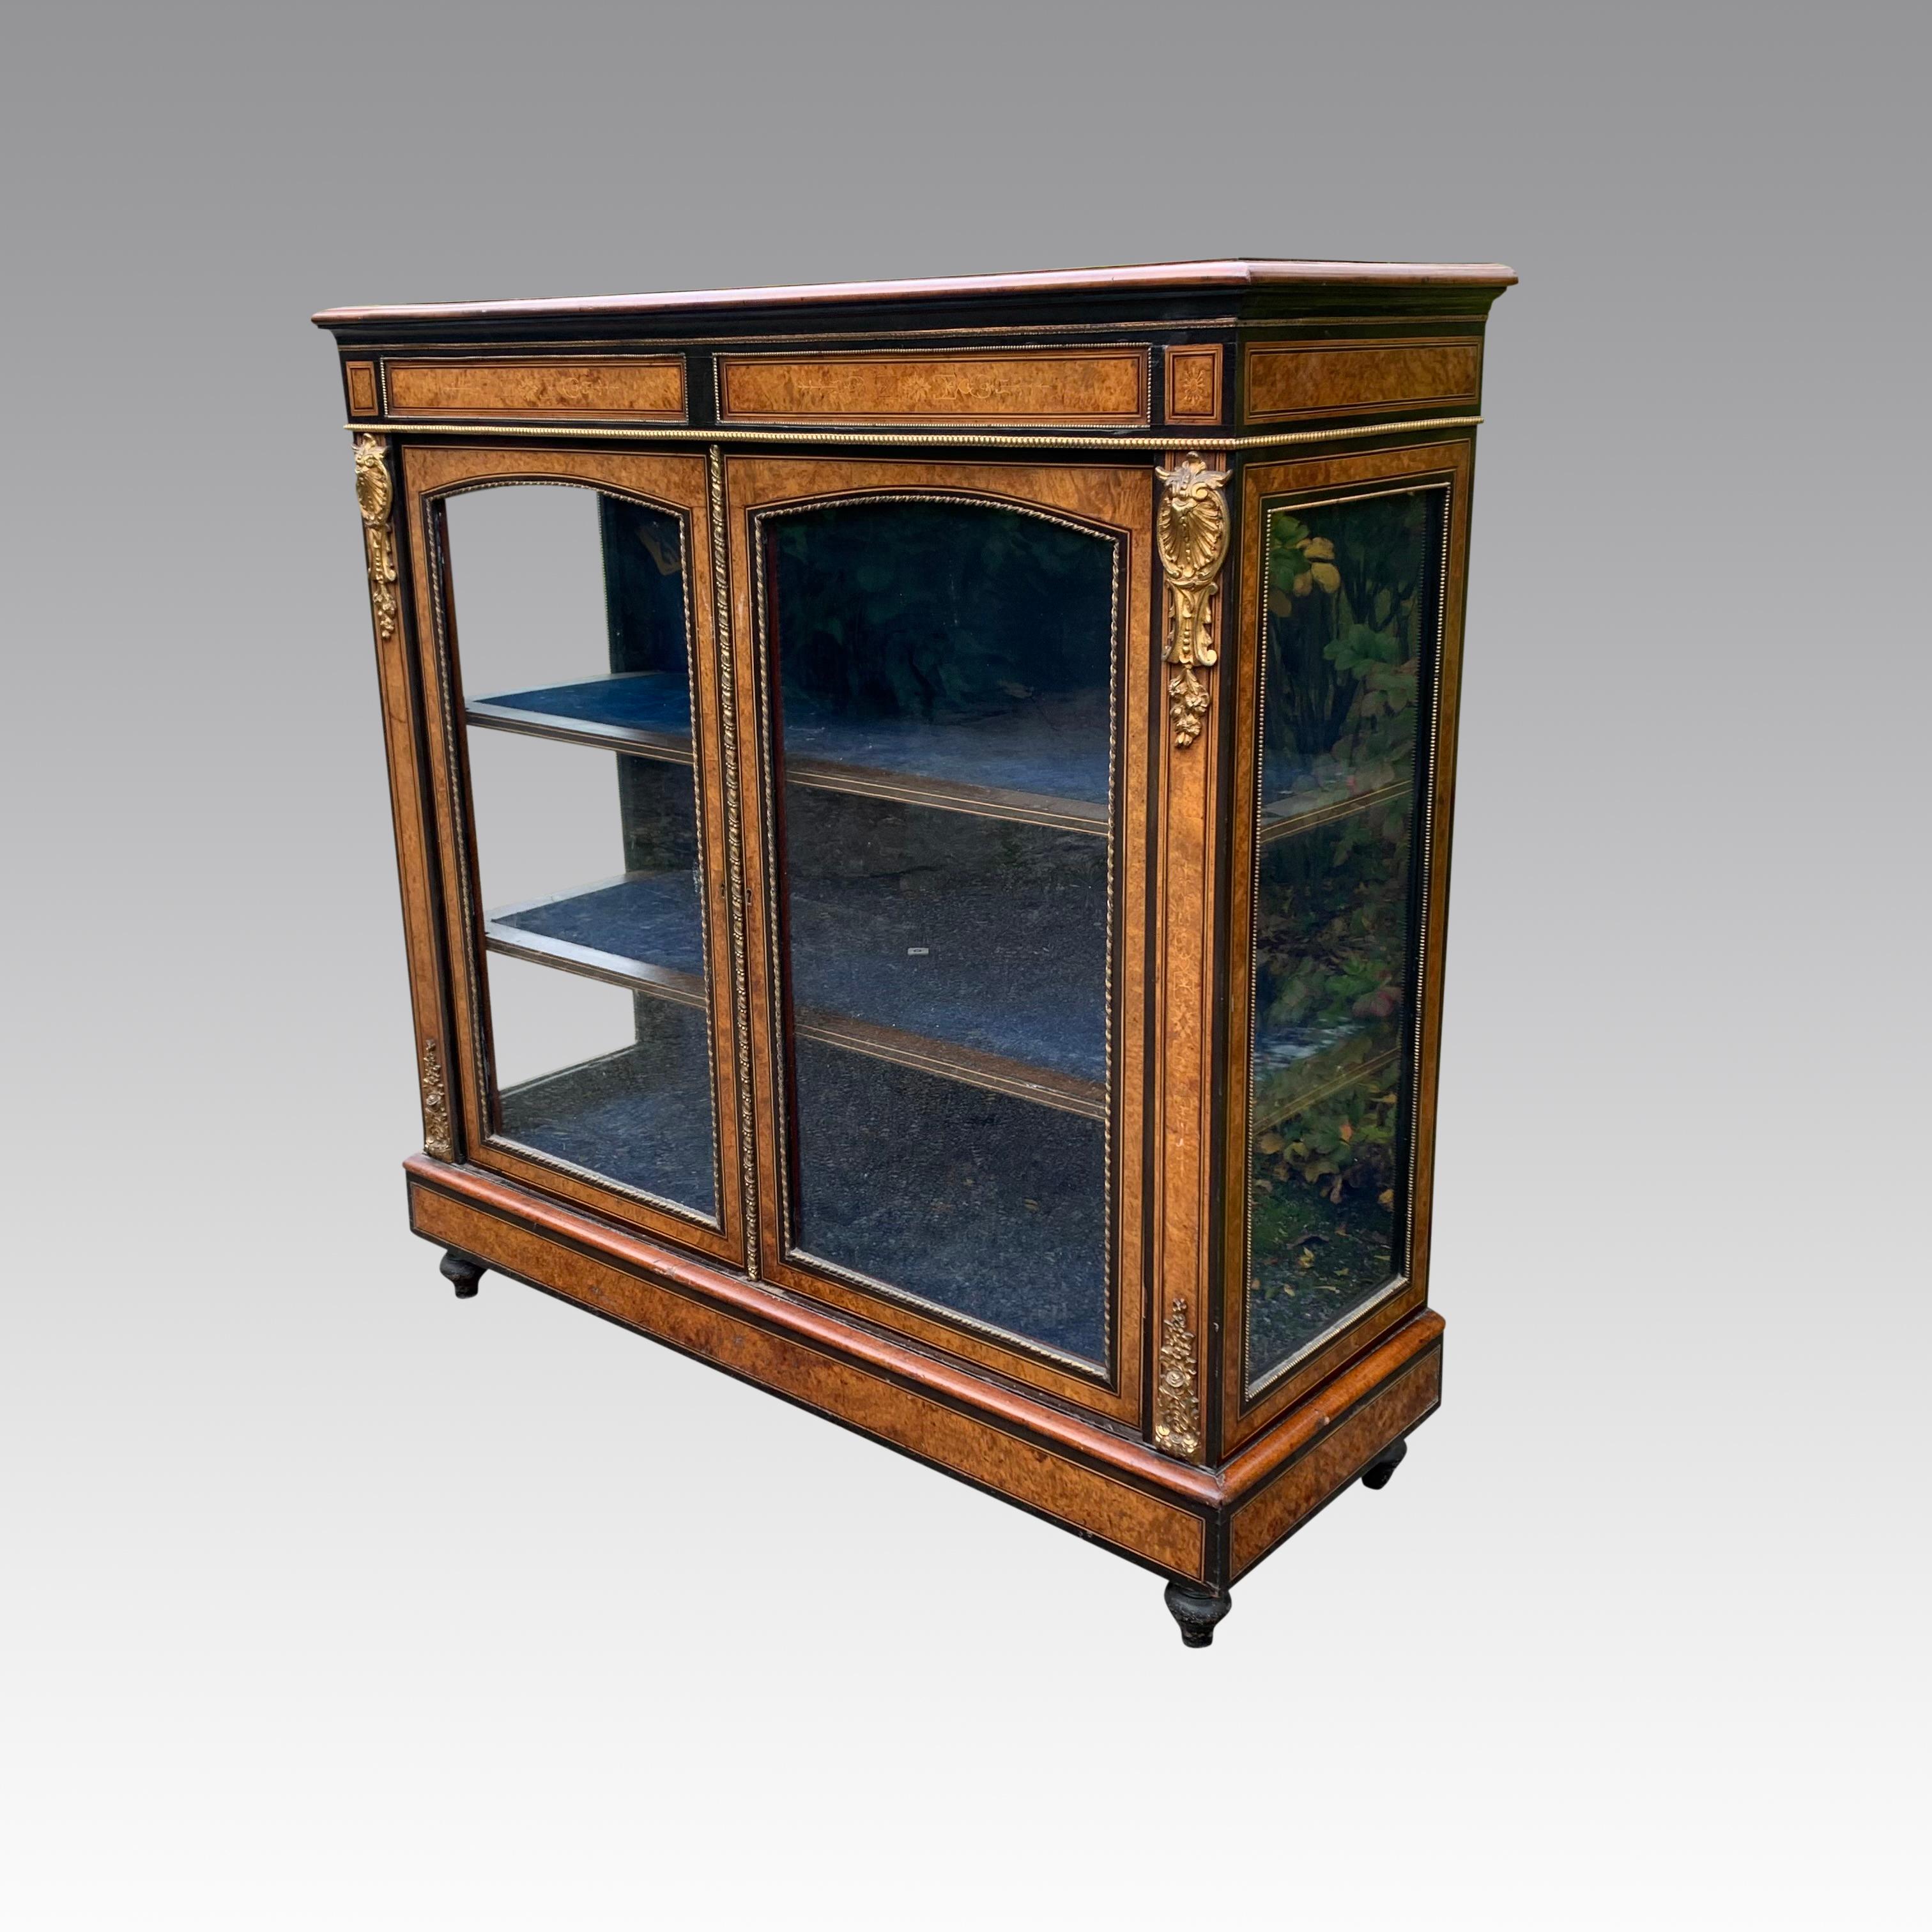 A superb quality mid 19th century walnut and inlaid side cabinet with glazed doors and sides. The ebonised top double crossbanded in burr walnut above an inlaid freize and arched glazed doors flanked by inlaid and ormolu mounted pilasters, standing